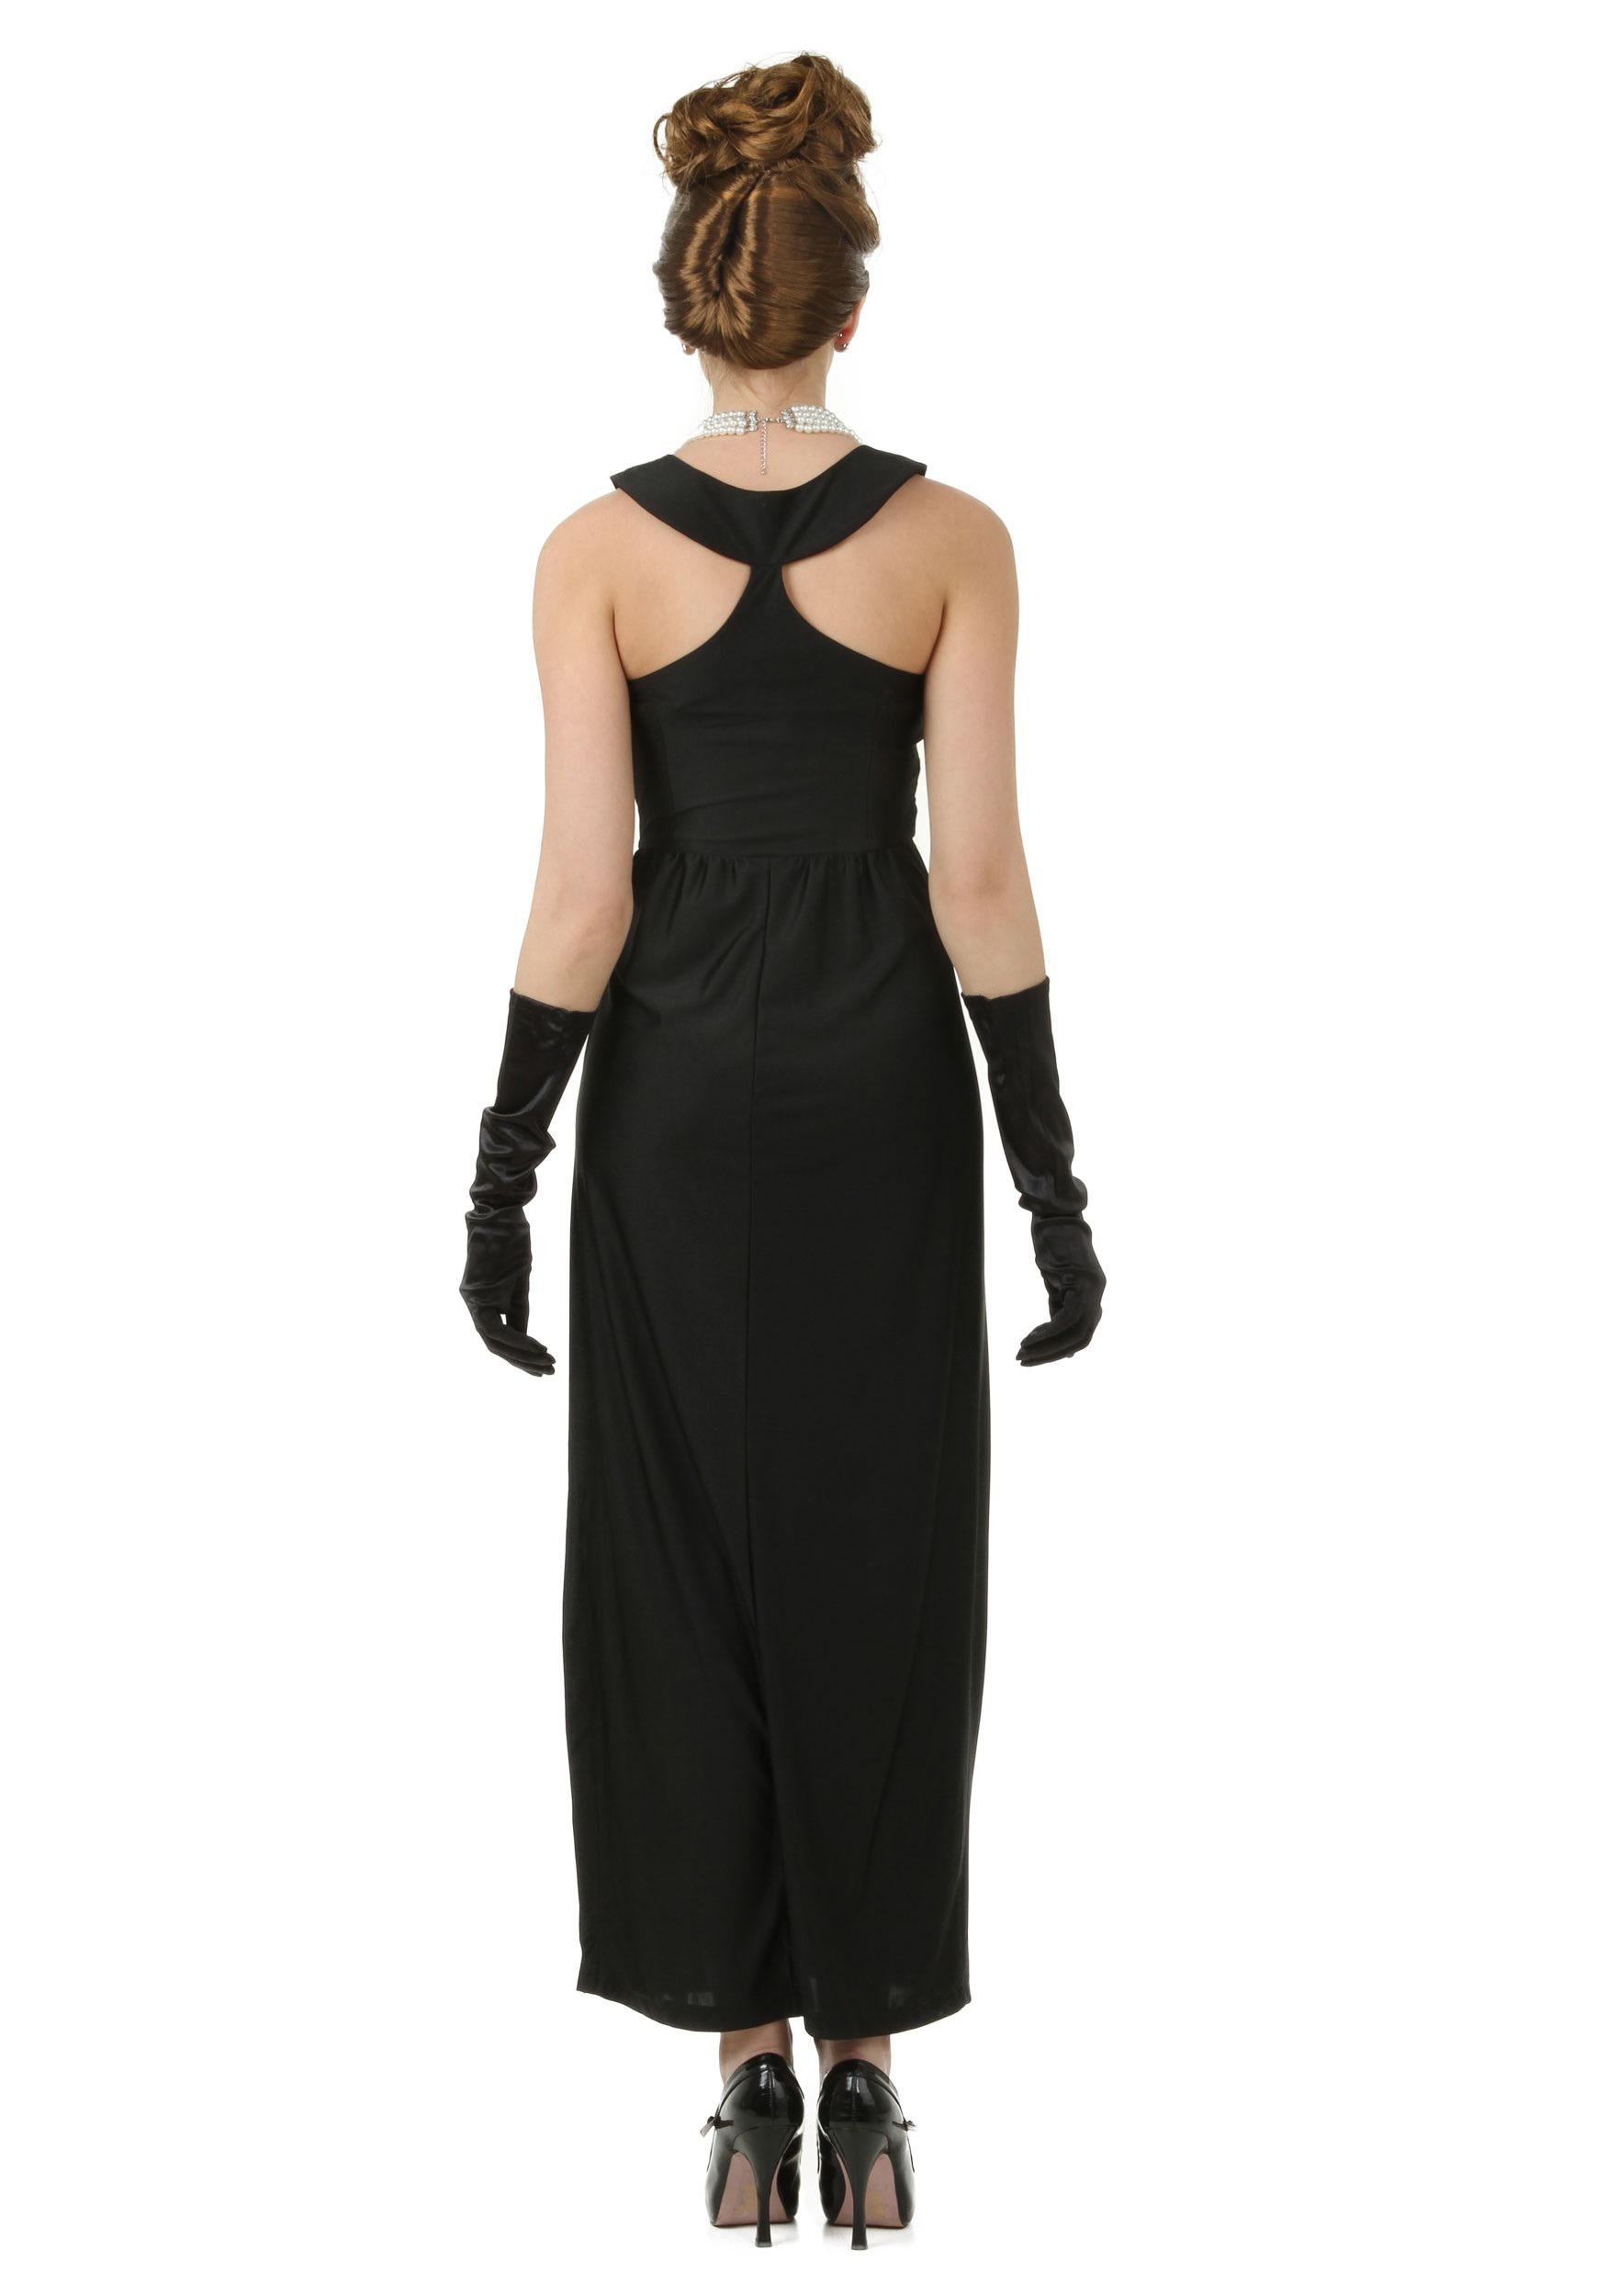 Women's Plus Size Breakfast At Tiffany's Holly Golightly Costume